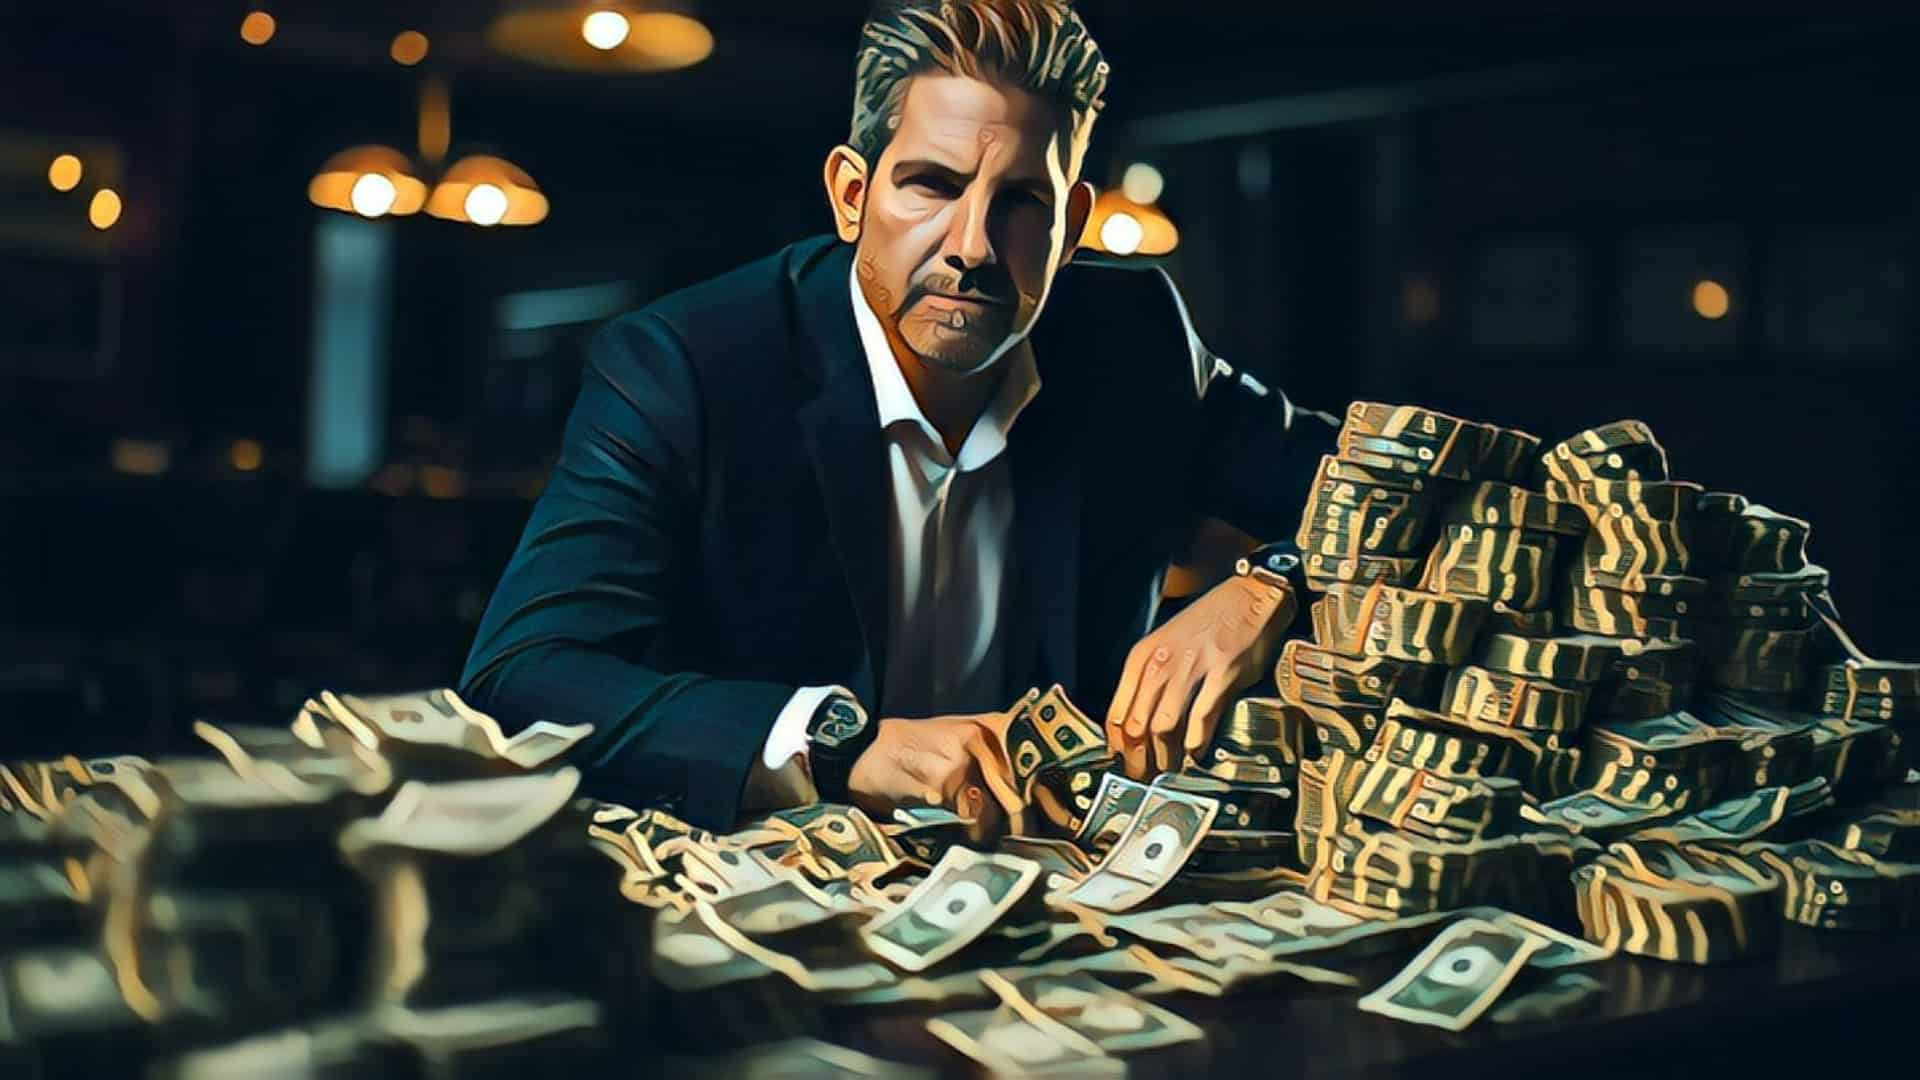 Real Estate Hustle Culture Scam (Exploiting Investors and Damaging the Housing Market) - Grant Cardone sitting at table covered with money